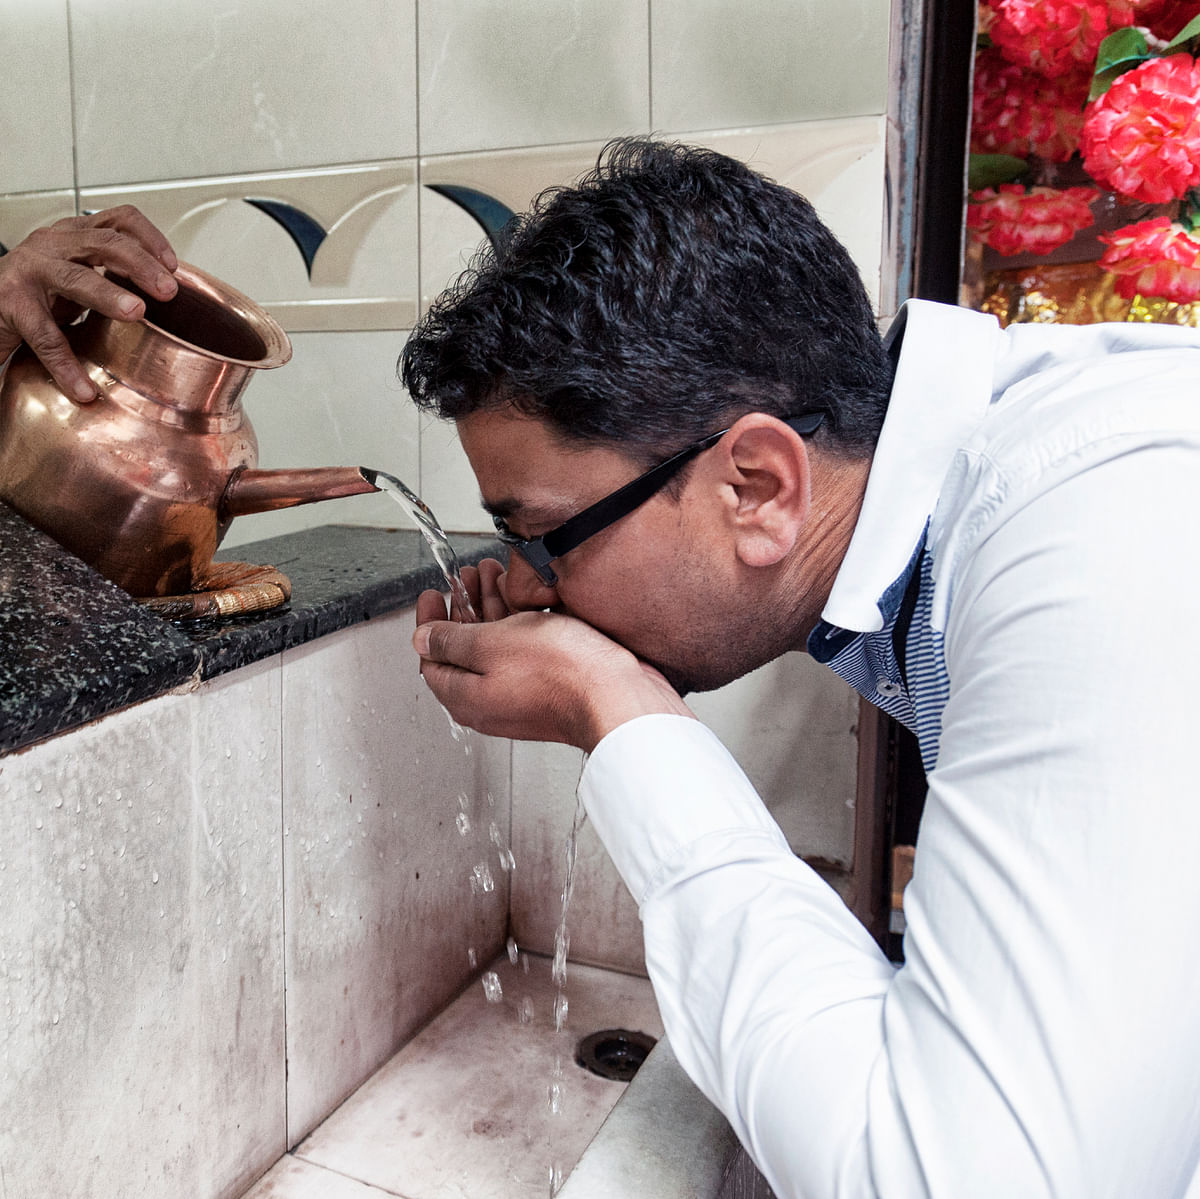 Delhi’s water supply is rapidly dwindling. The government will have to move fast if it wants to prevent a crisis. 